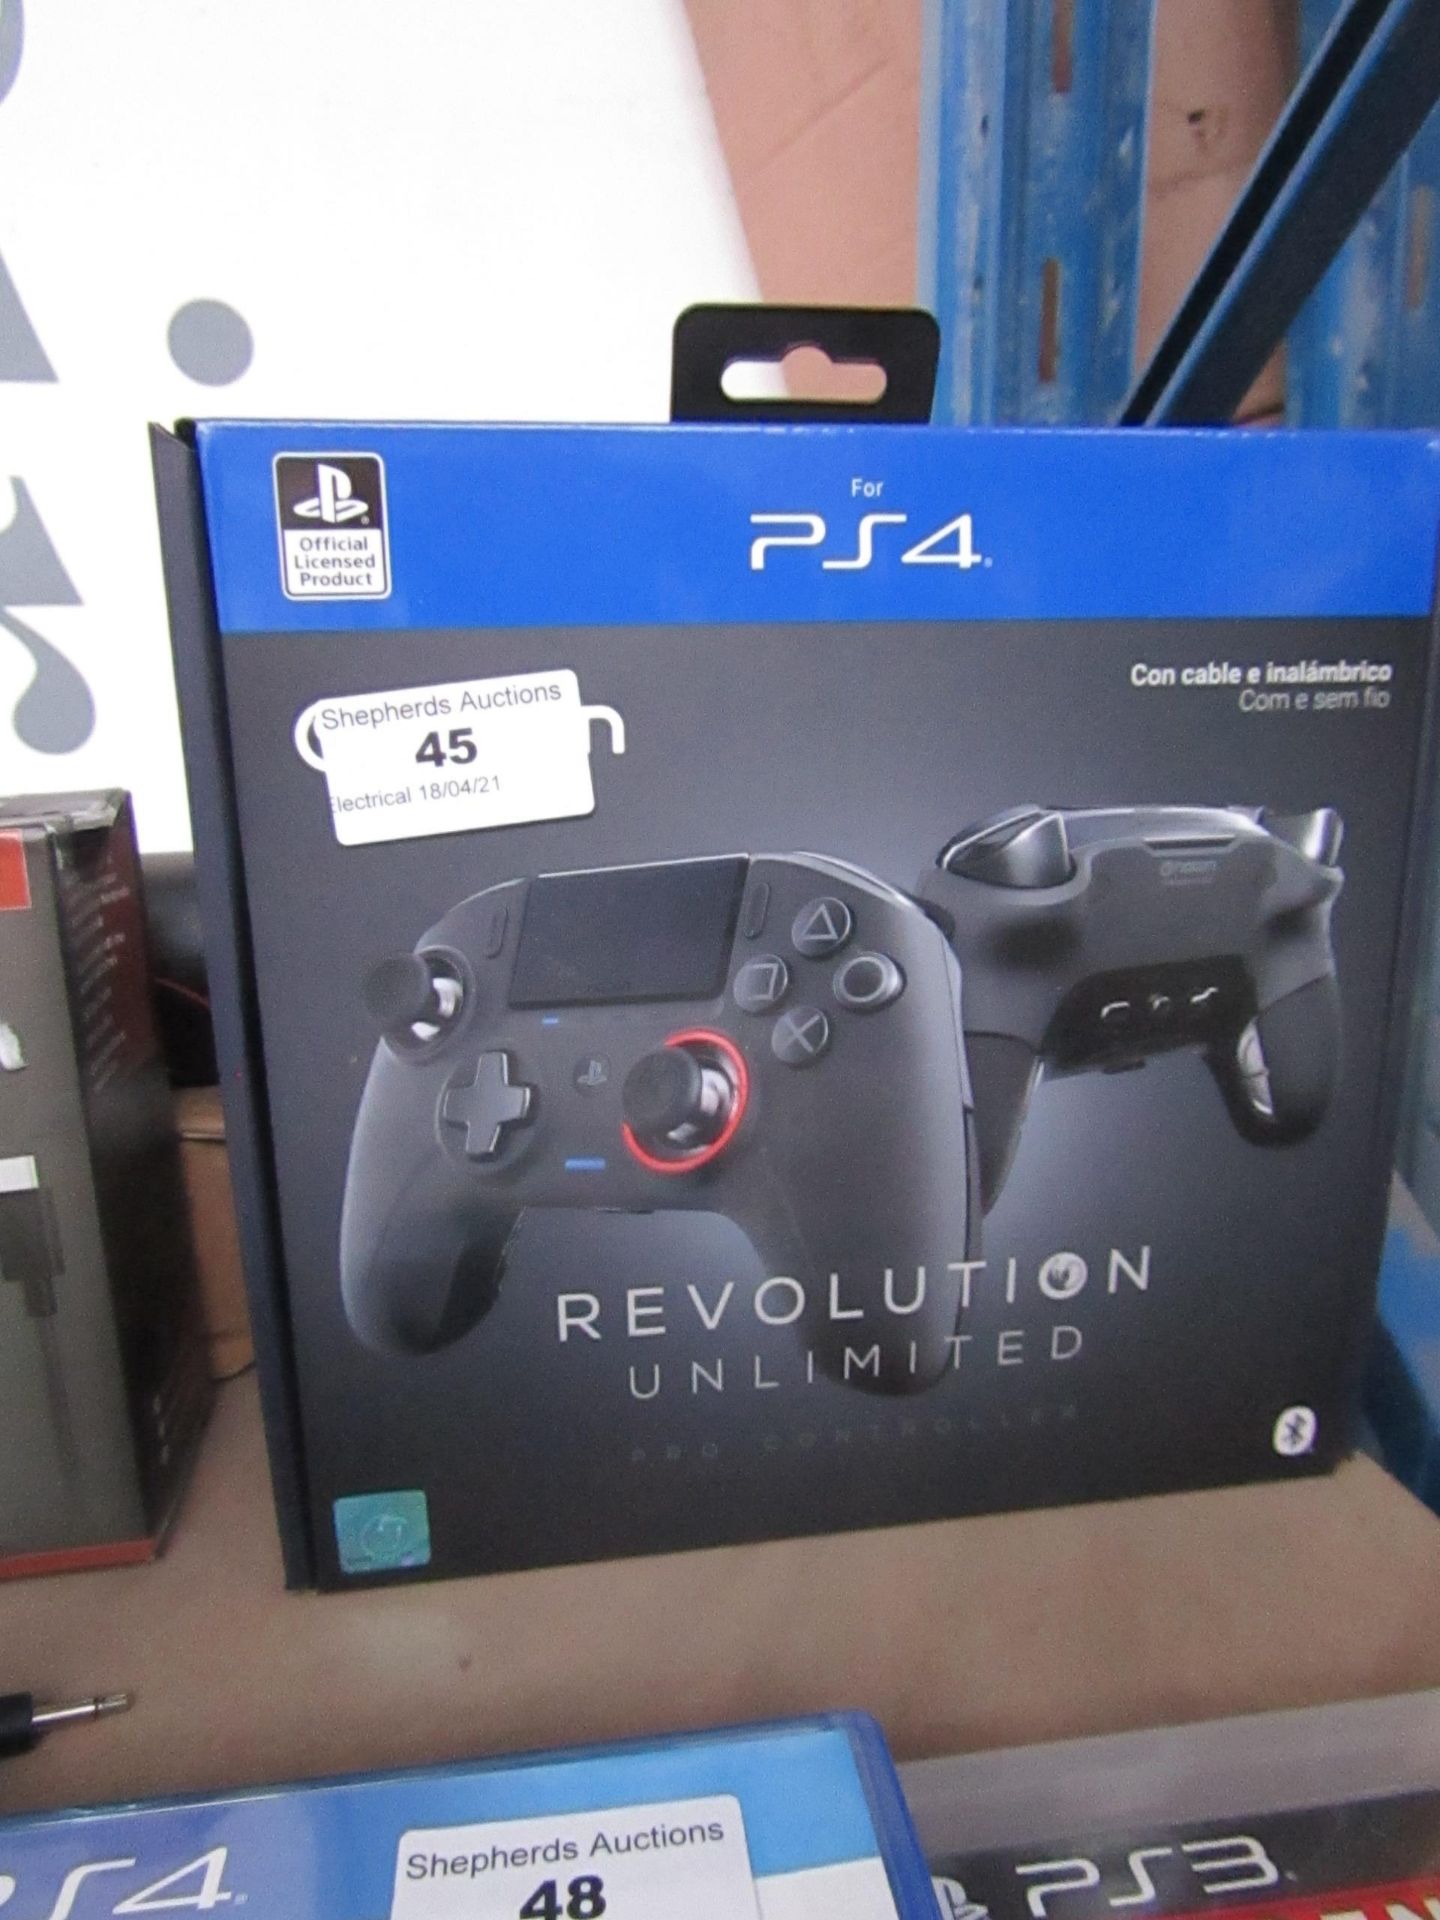 Nacon PS4 Revolution Unlimited controller, unchecked and boxed.